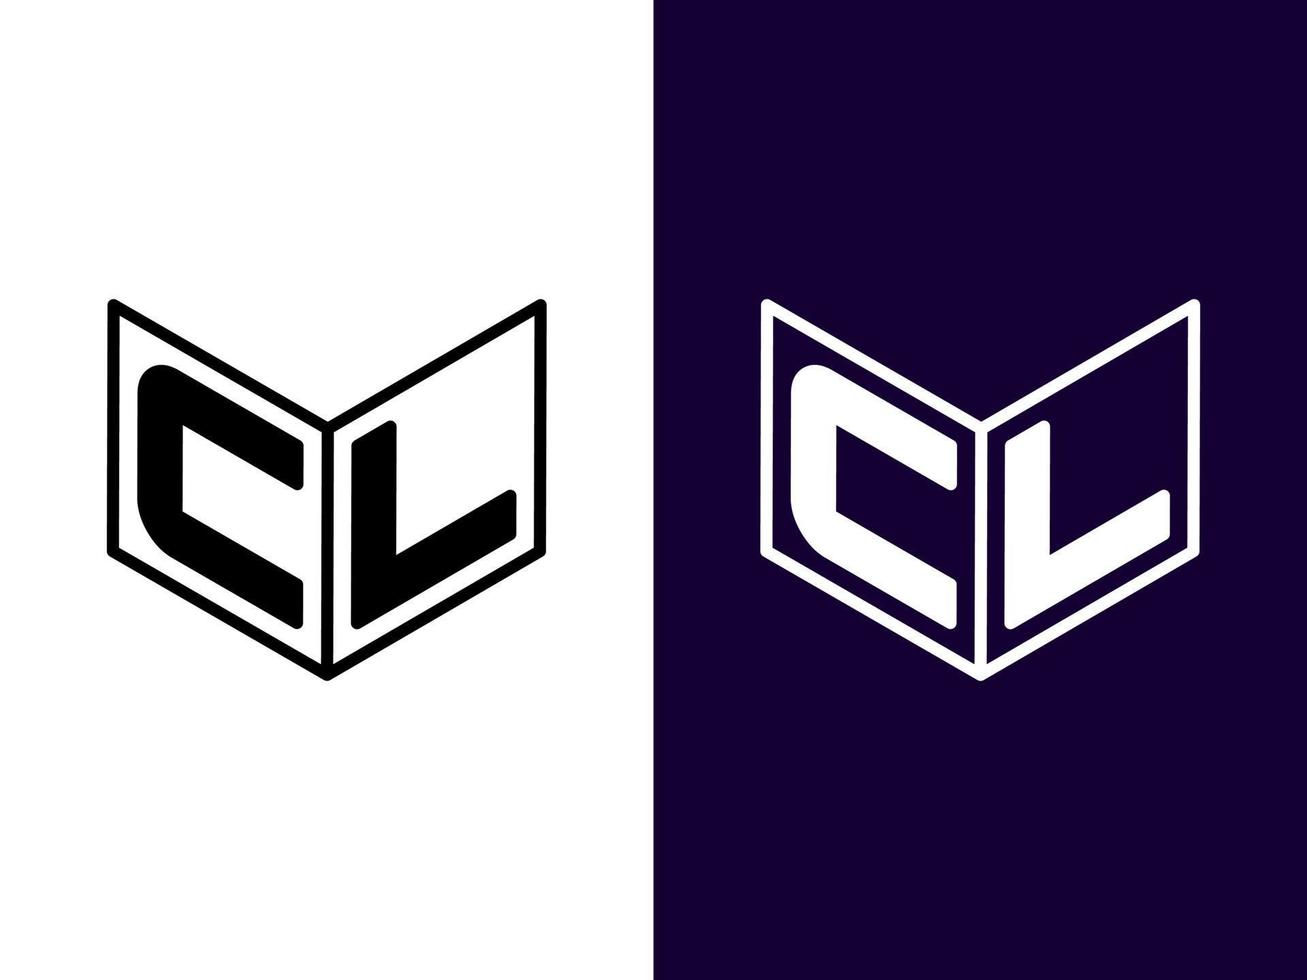 Initial letter CL minimalist and modern 3D logo design vector